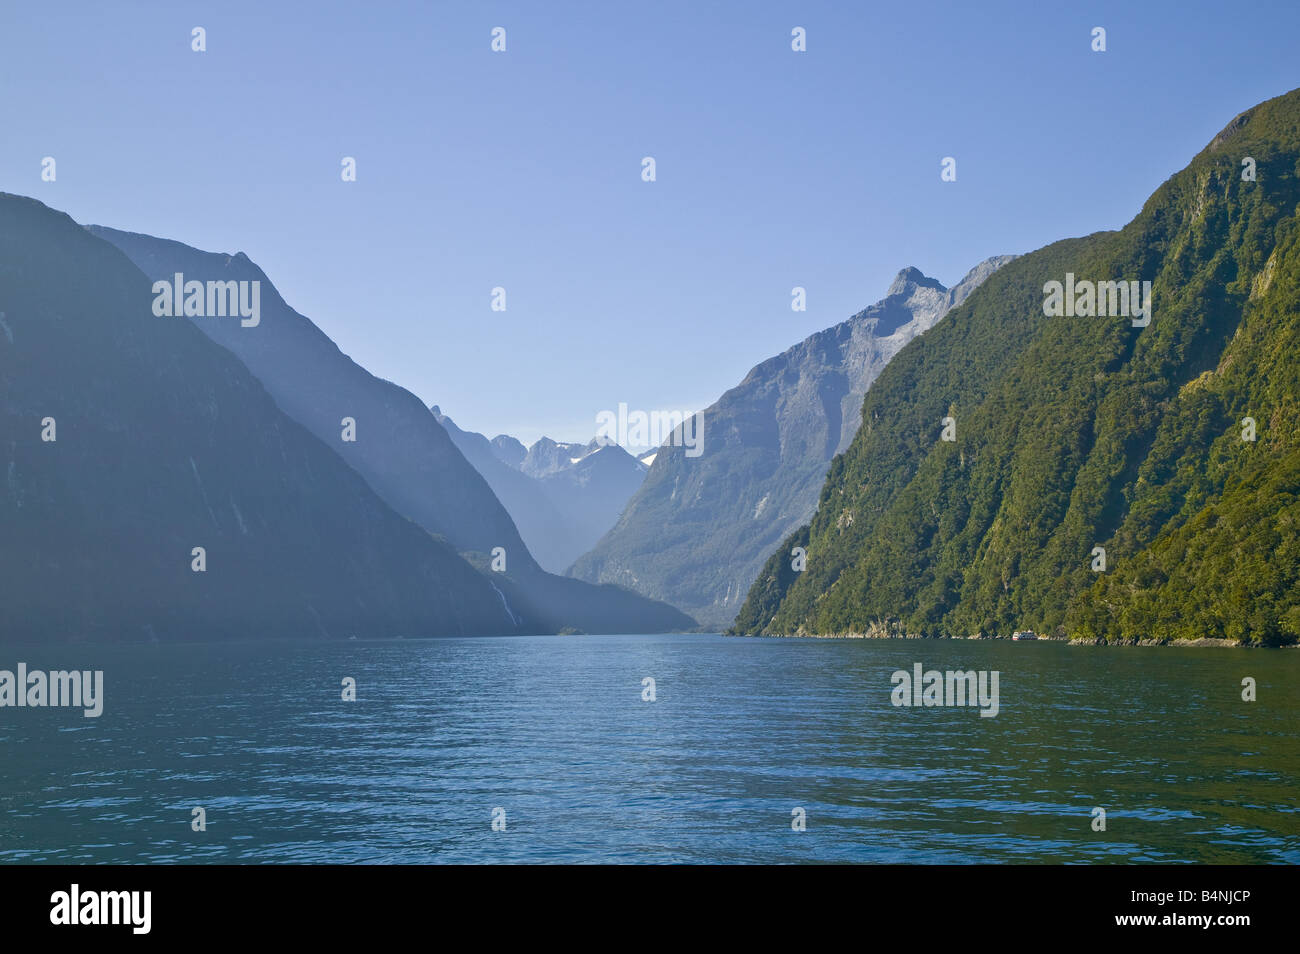 Steep cliffs on each side of Milford Sound, viewed from the sea entrance, South Island, New Zealand Stock Photo